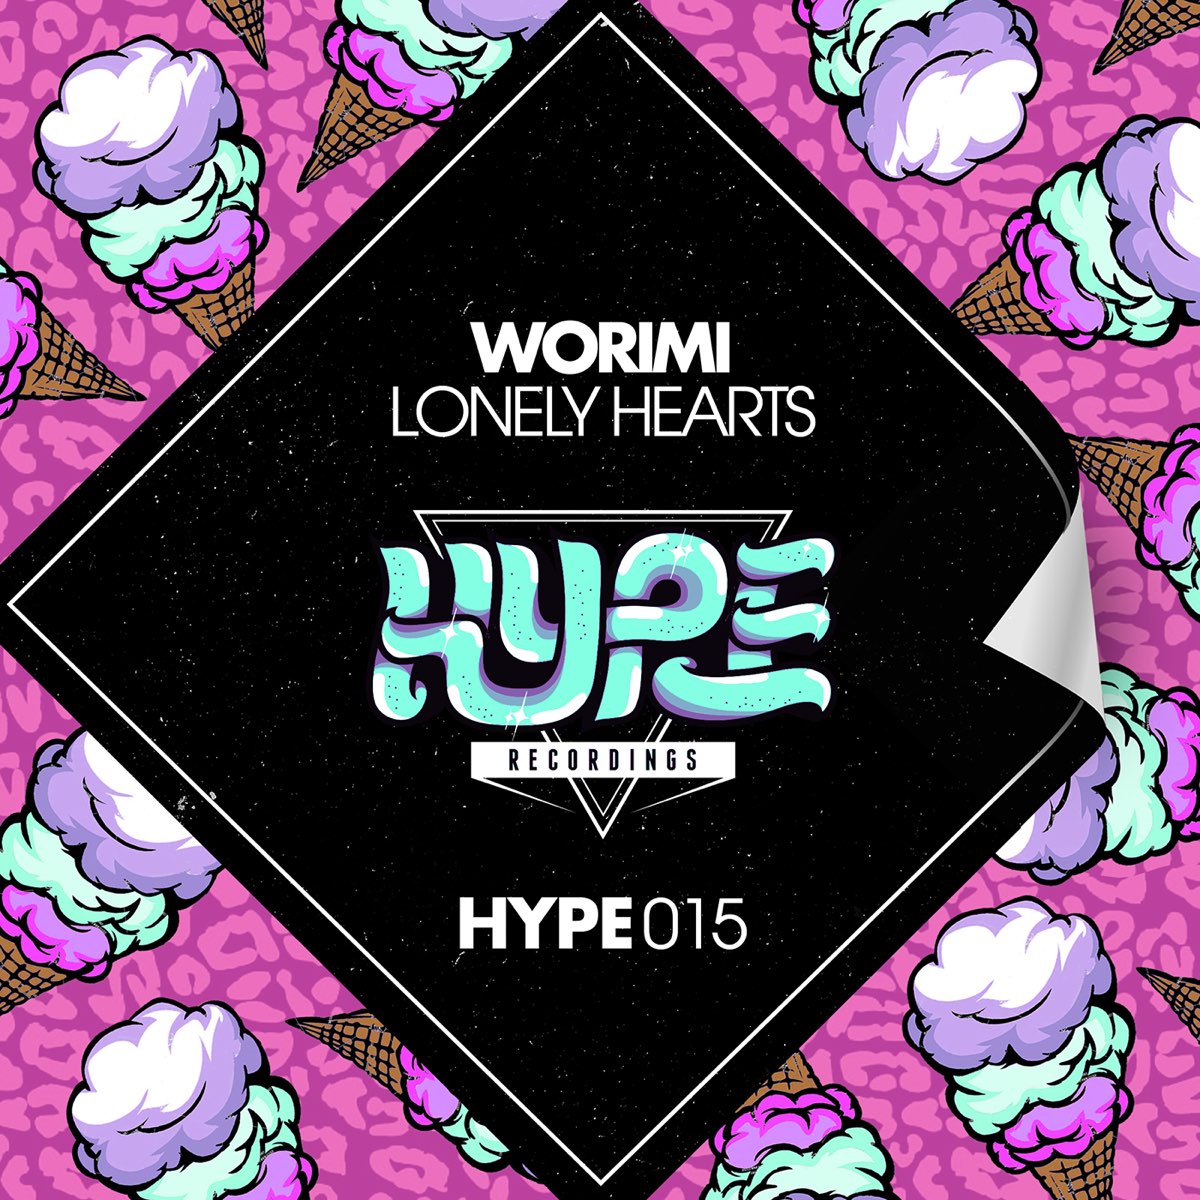 Lonely mixed. Hype Labels. Lonely Heart Original Mix Synthetic Fantasy.